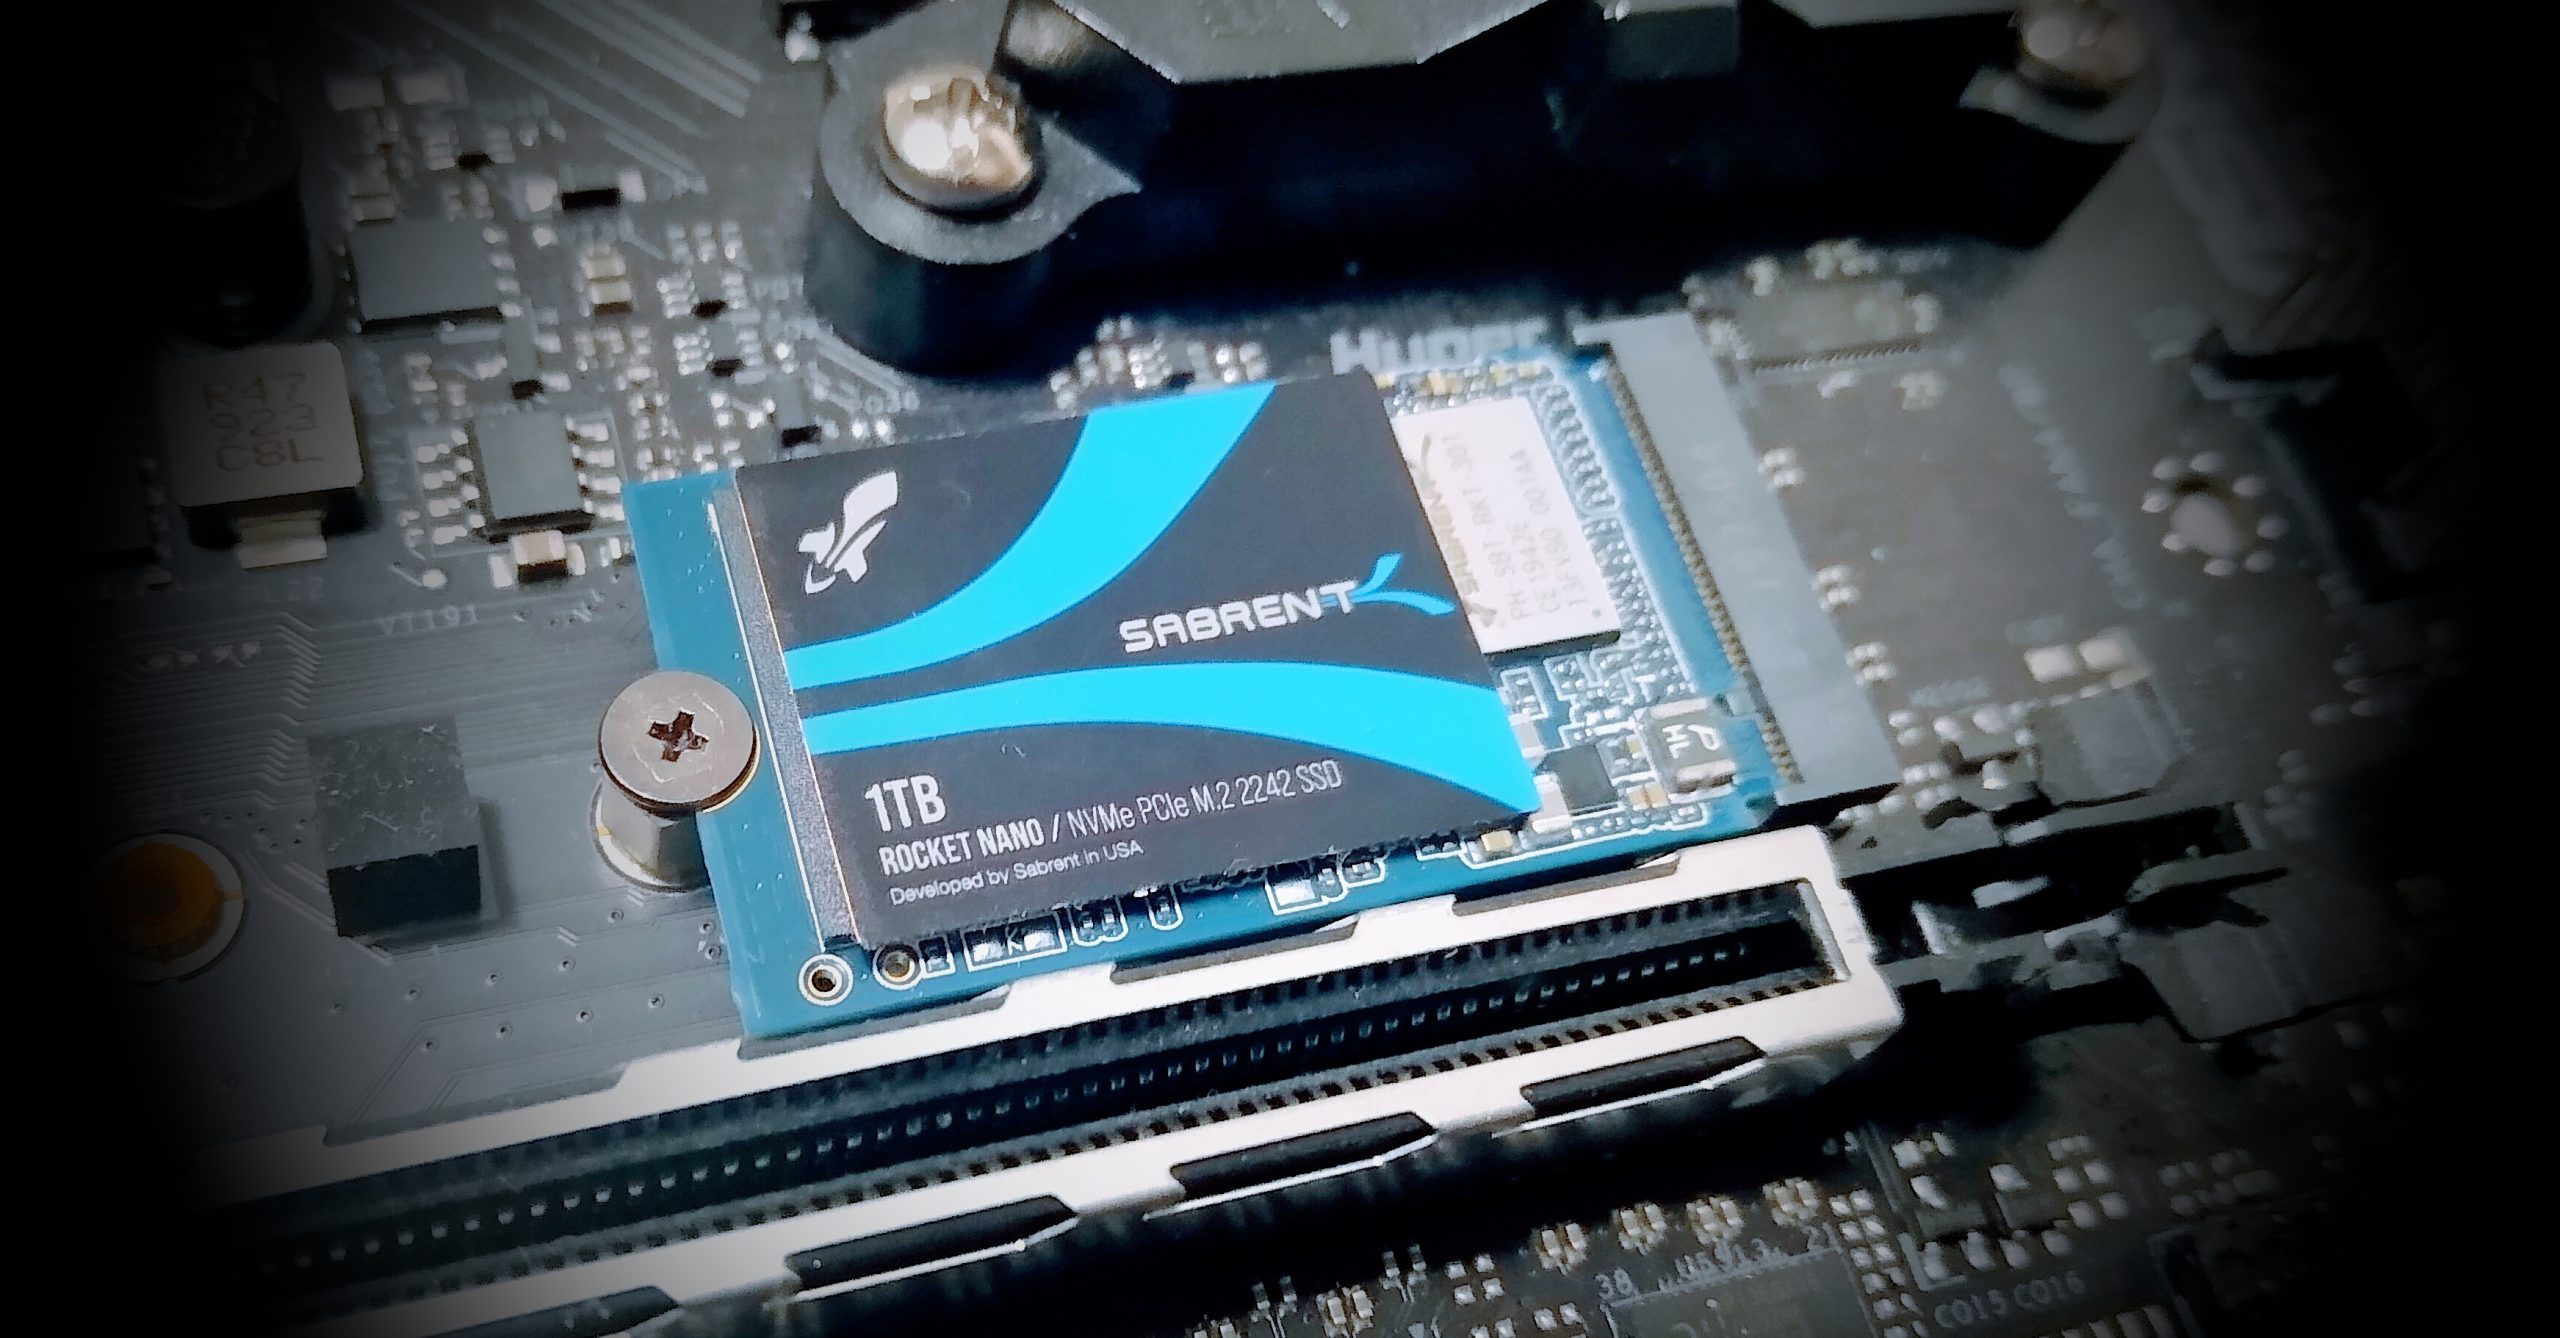 Sabrent Rocket Nano NVMe Review: Good things come in small packages